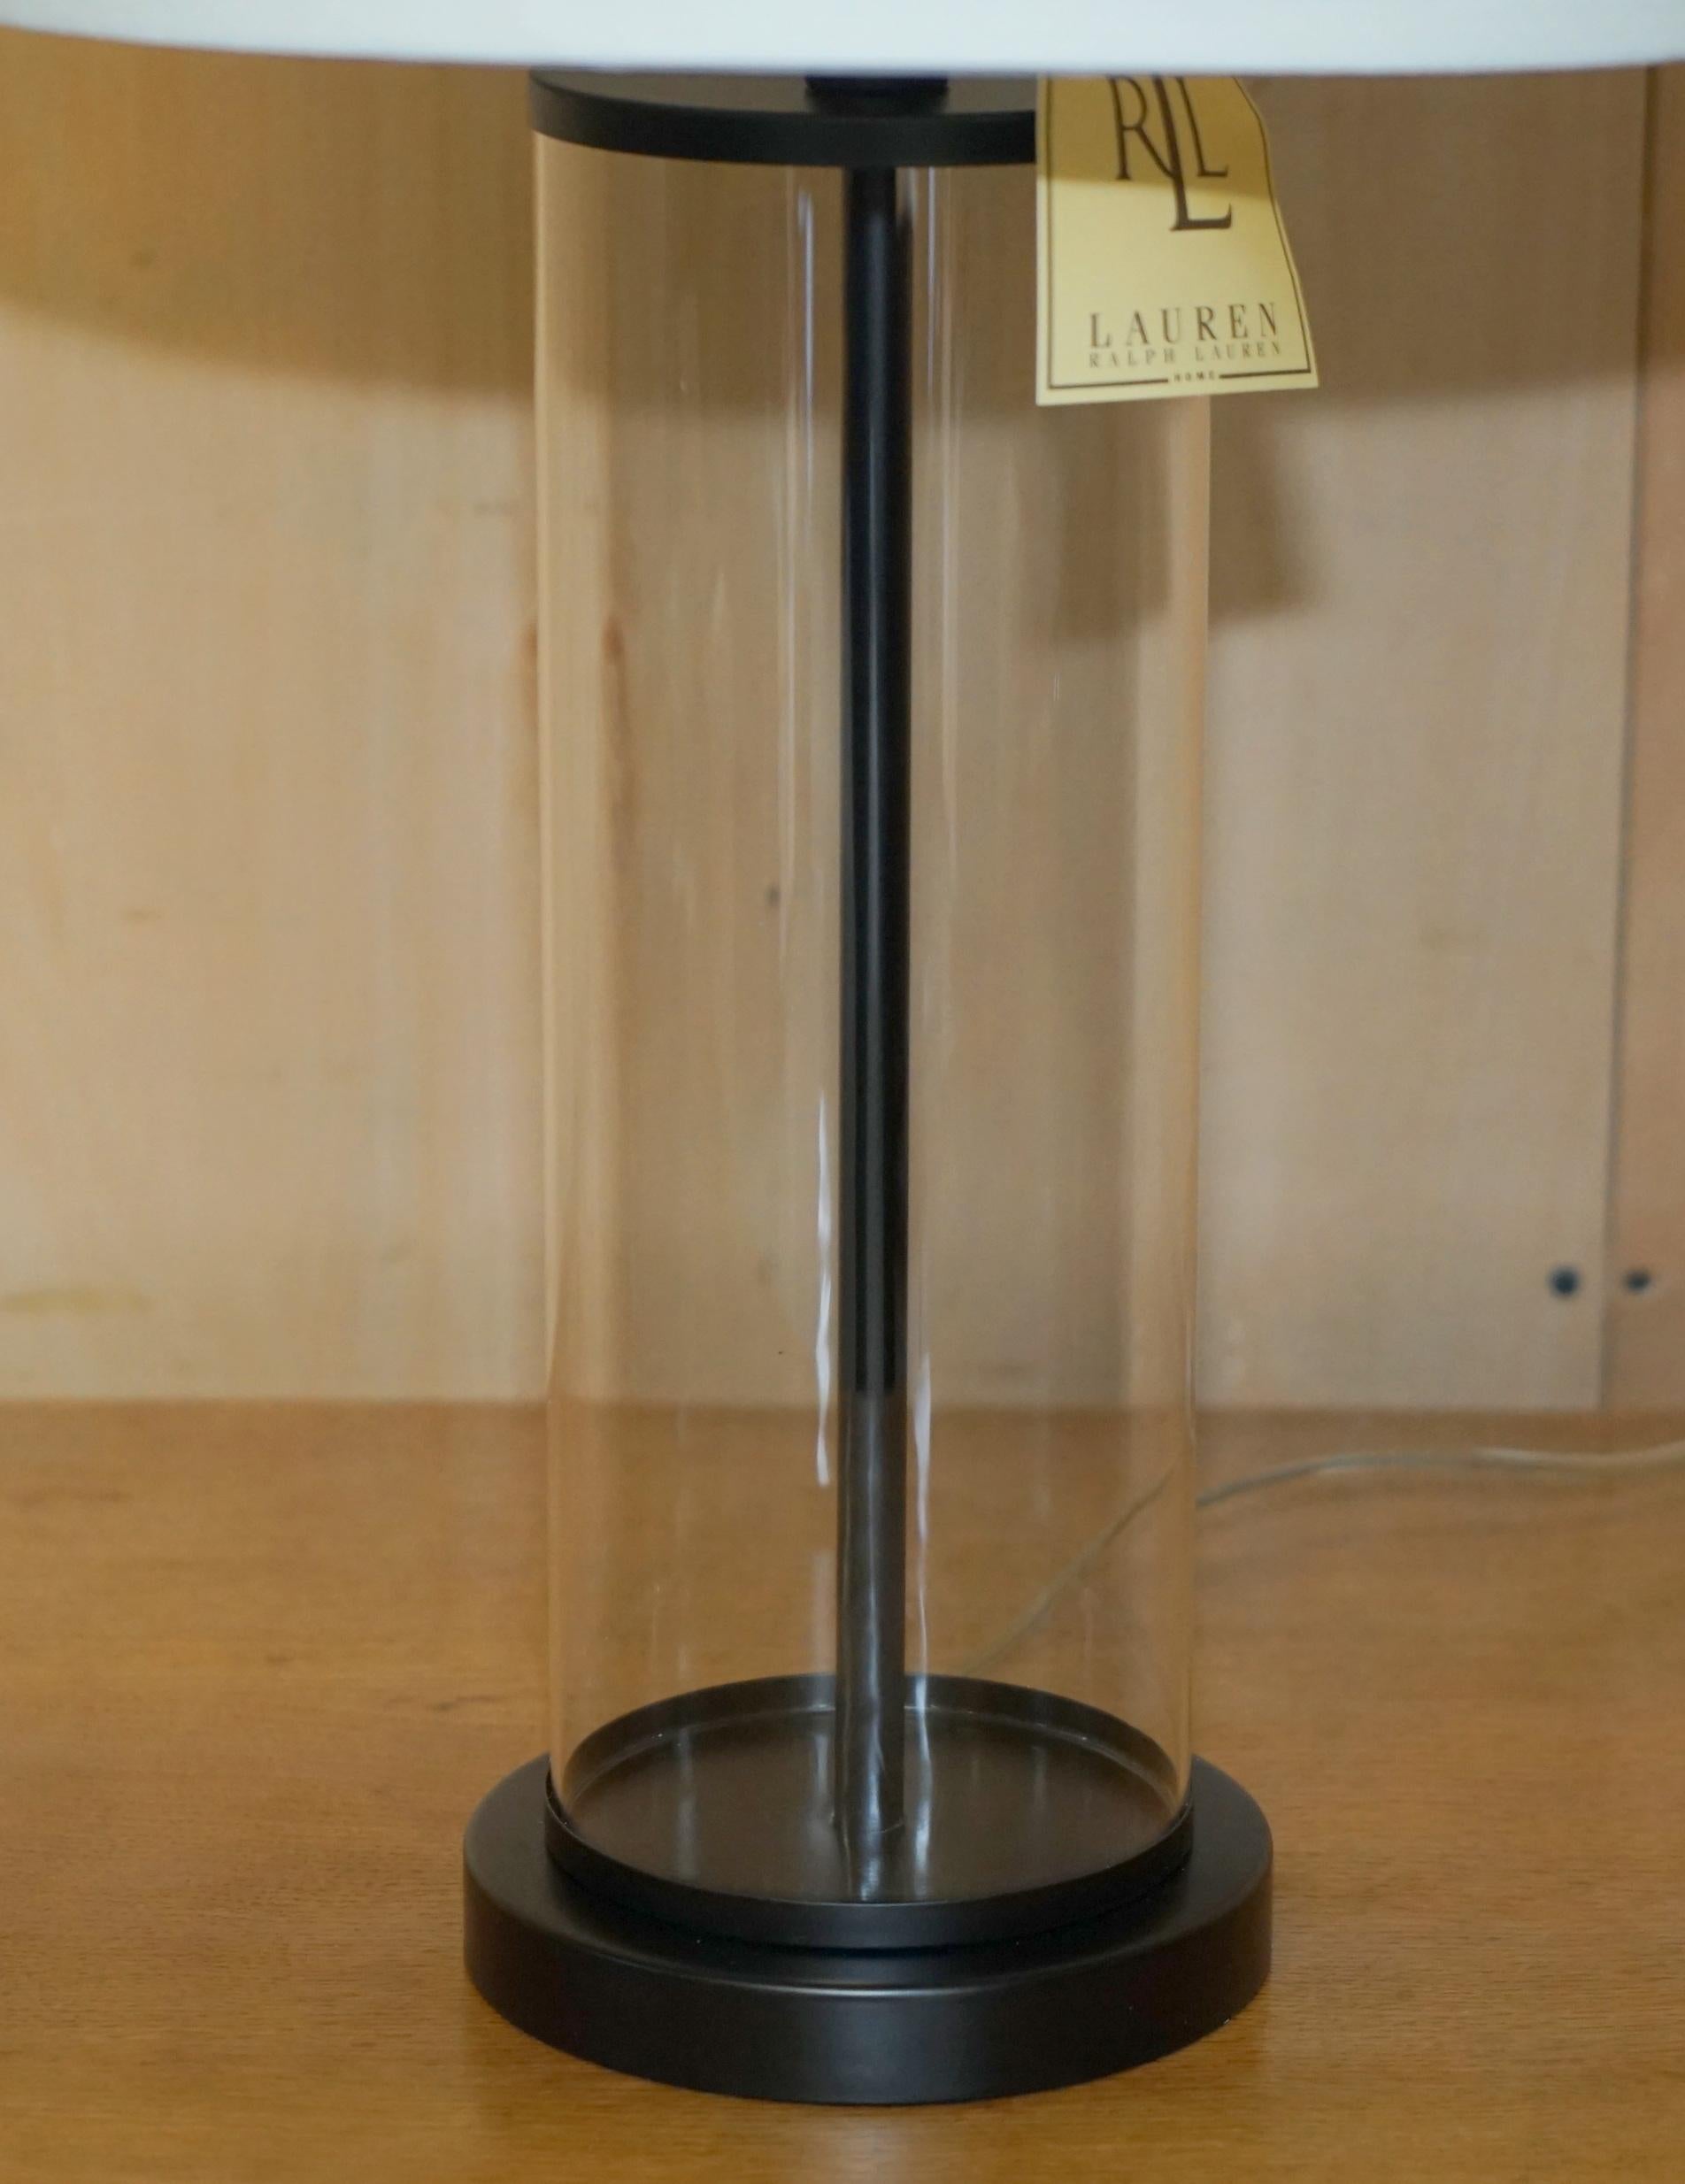 English 1 OF 4 BRAND NEW IN THE BOX RALPH LAUREN BLACK STORM LANTERN GLASS TABLE LAMPs For Sale